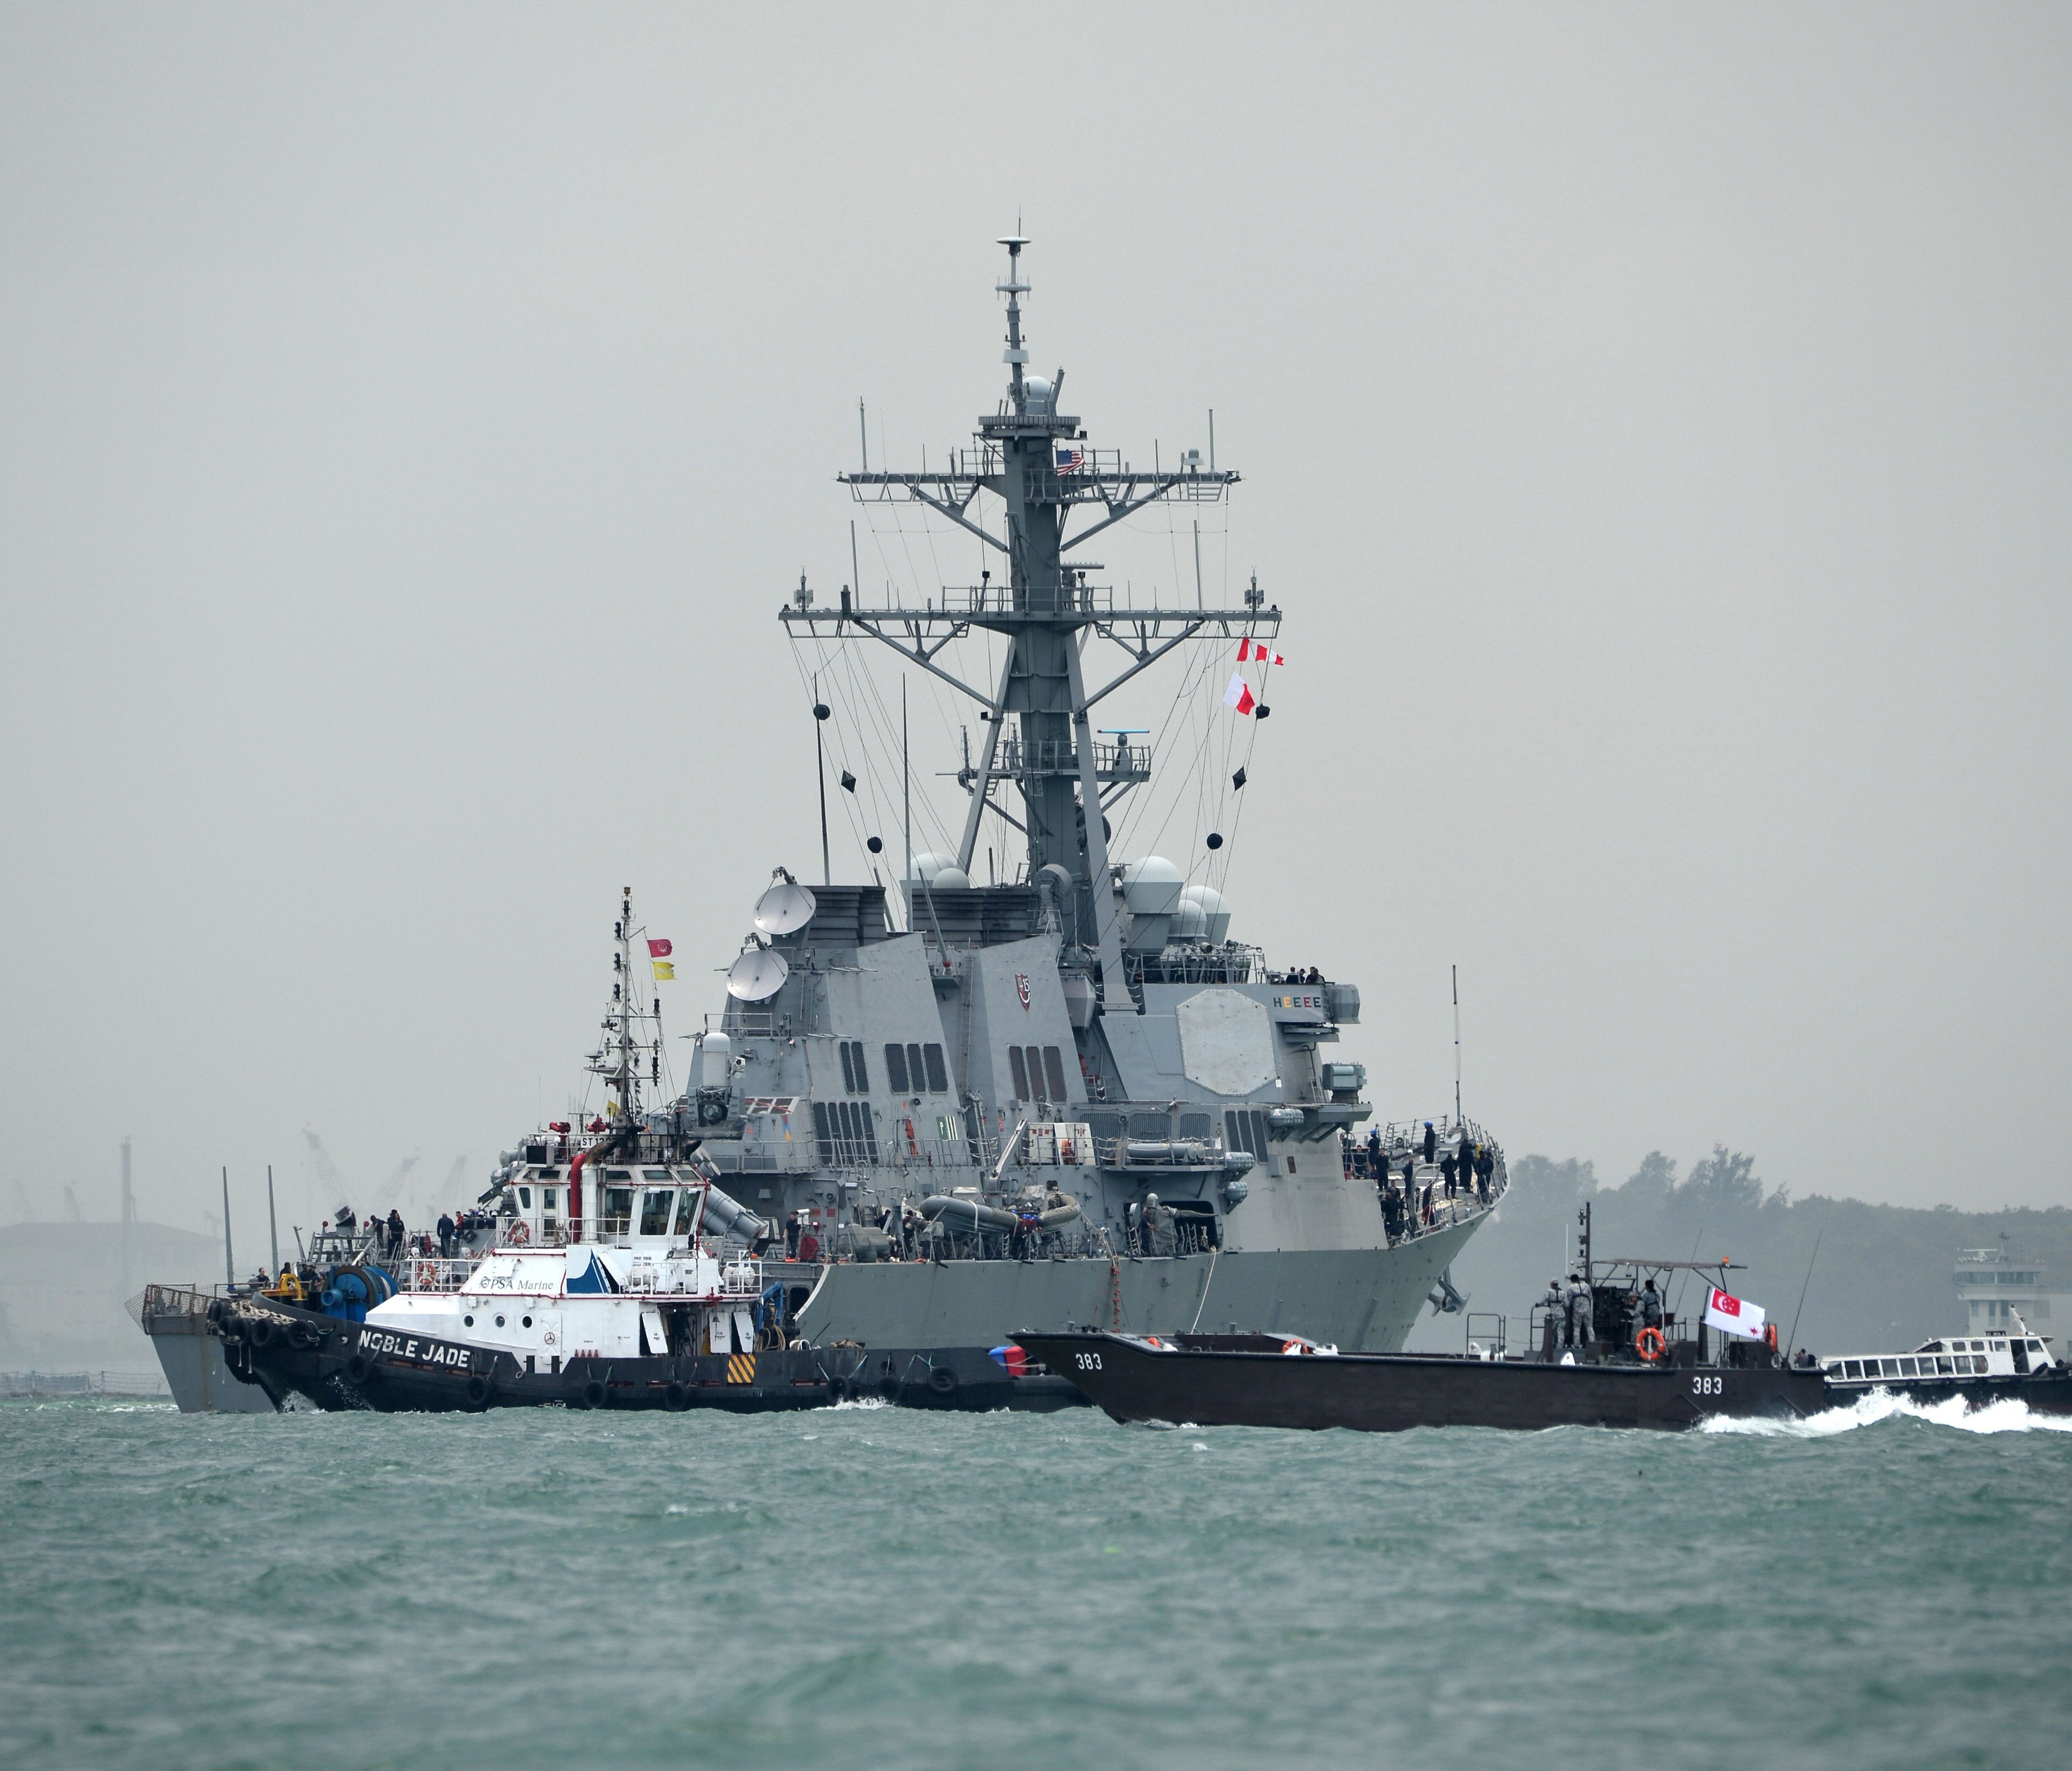 The guided-missile destroyer USS John S. McCain is guided by a tugboat after a collision with an oil tanker, outside Changi naval base in Singapore on Aug. 21, 2017.